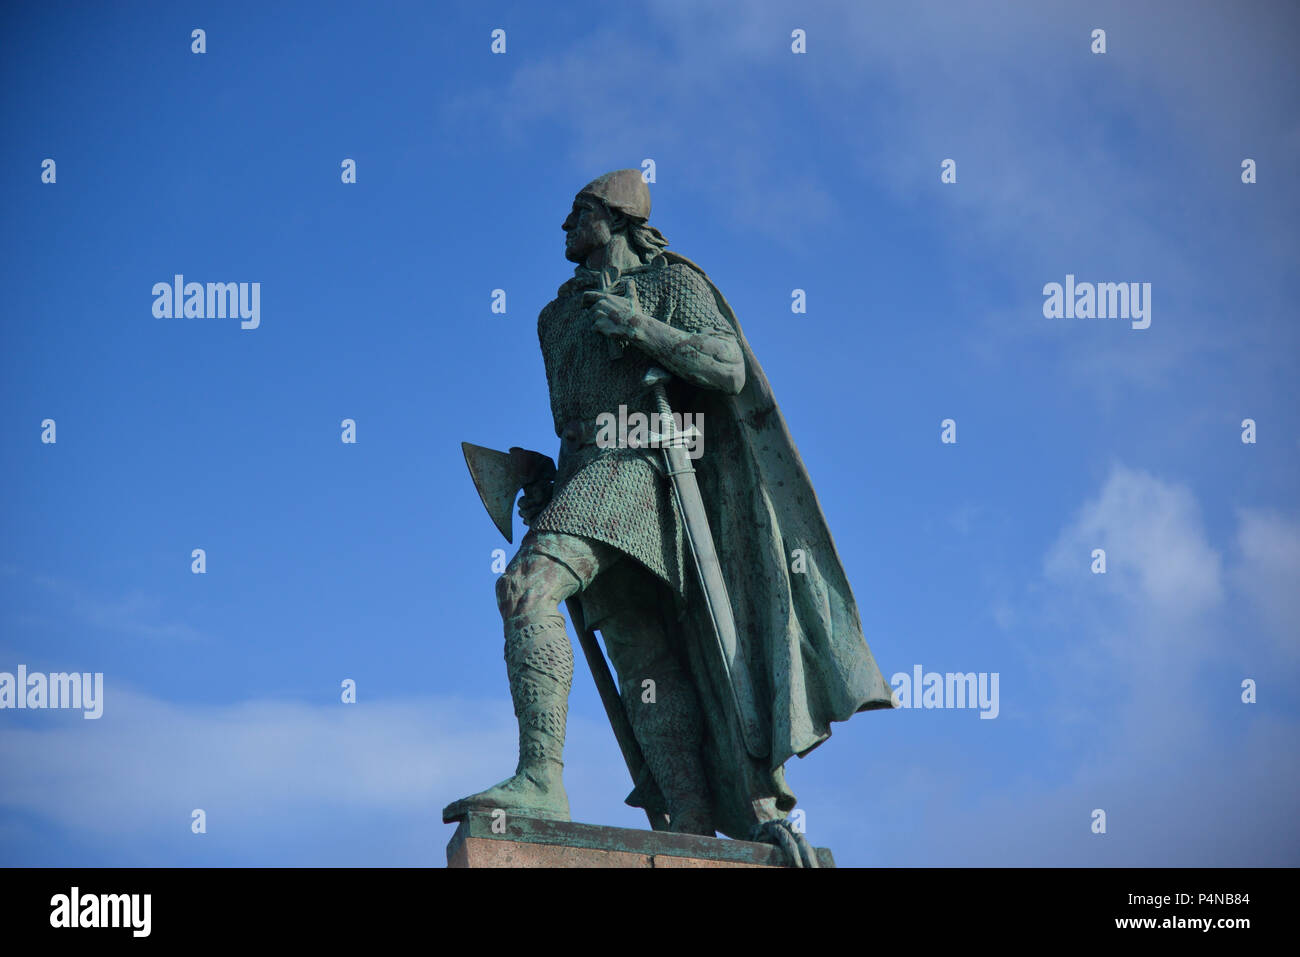 Statue of famous Norse explorer Leif Erikson or Leif Ericson from Iceland, the first known European to have discovered continental North America. Stock Photo